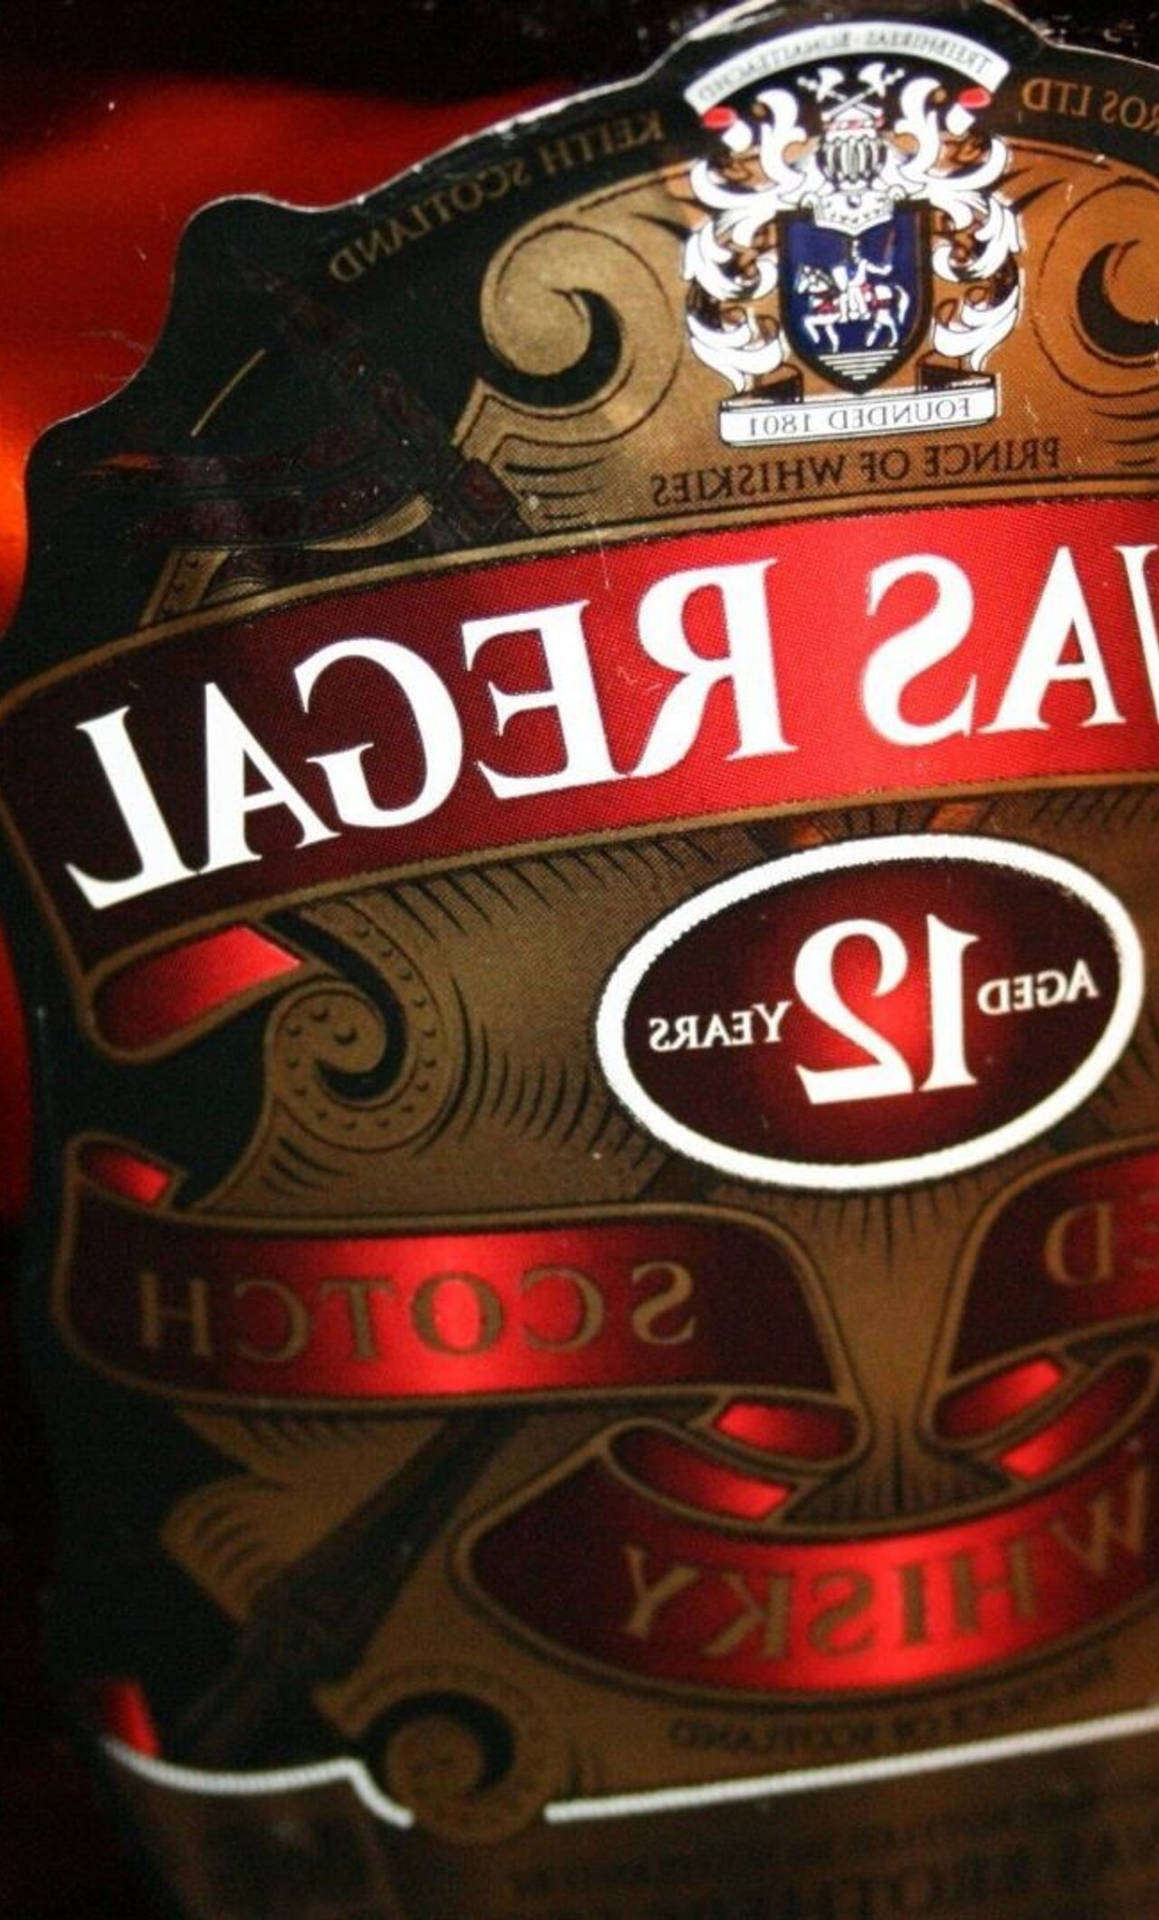 Chivasregal Mirrored Shot Can Be Translated Into Italian As 